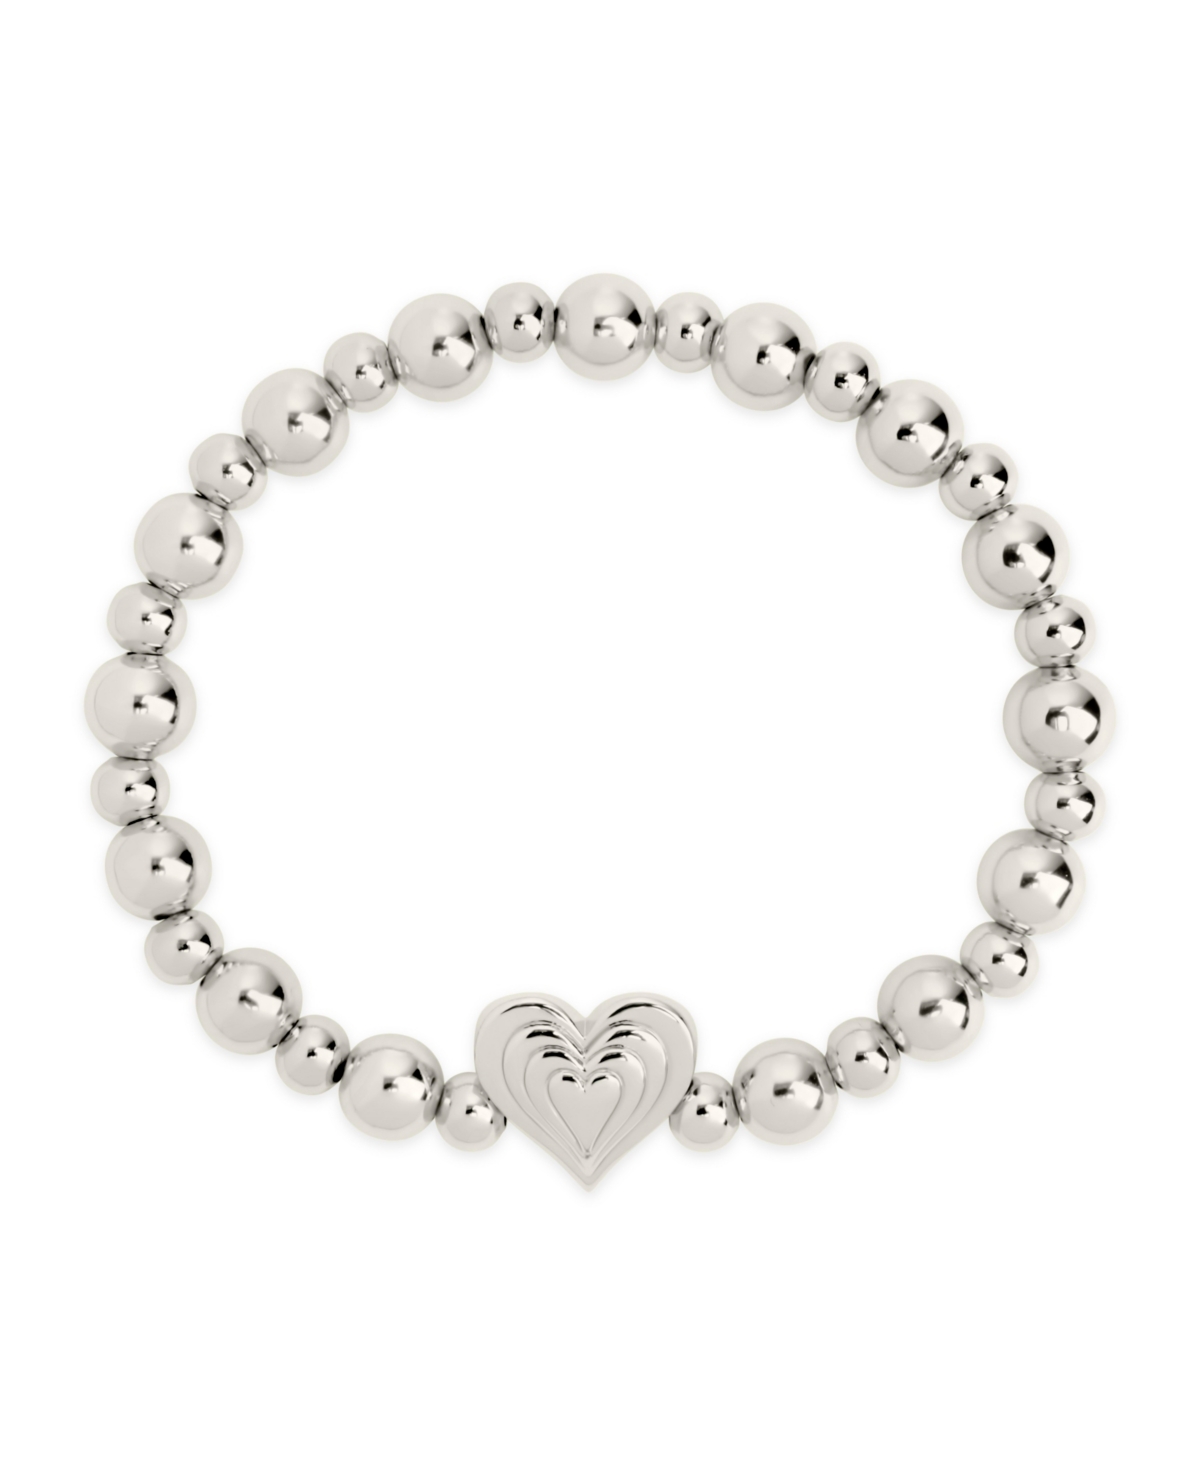 Silver-Tone or Gold-Tone Beating Heart Beaded Bracelet - Silver